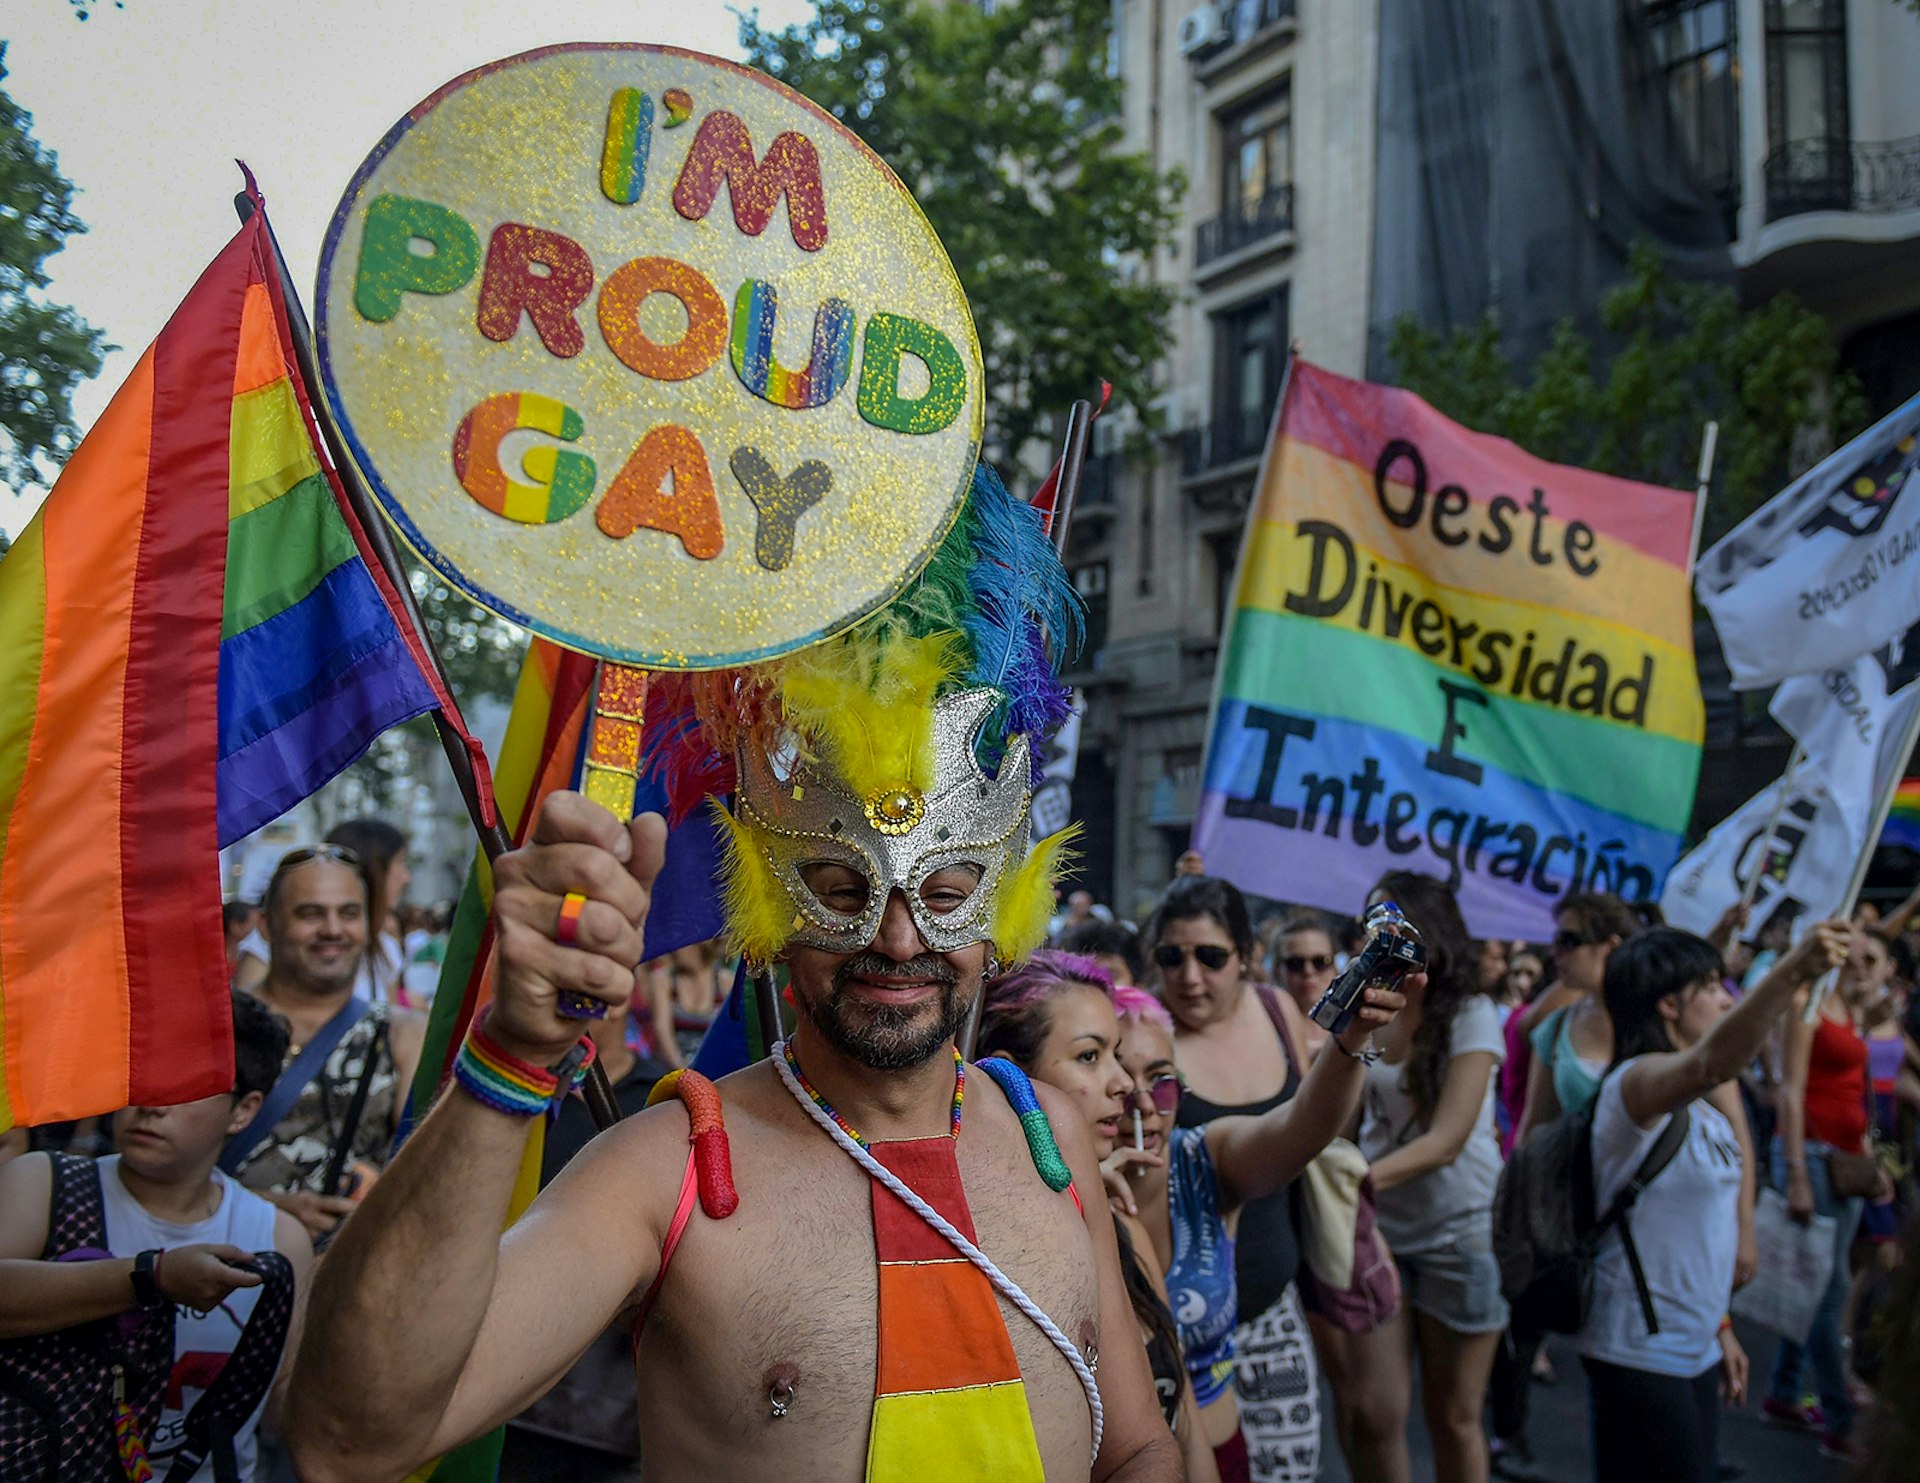 A shirtless man wears a masquerade mask and holds a sign that says "I'm Proud Gay"© JUAN MABROMATA / Getty Images